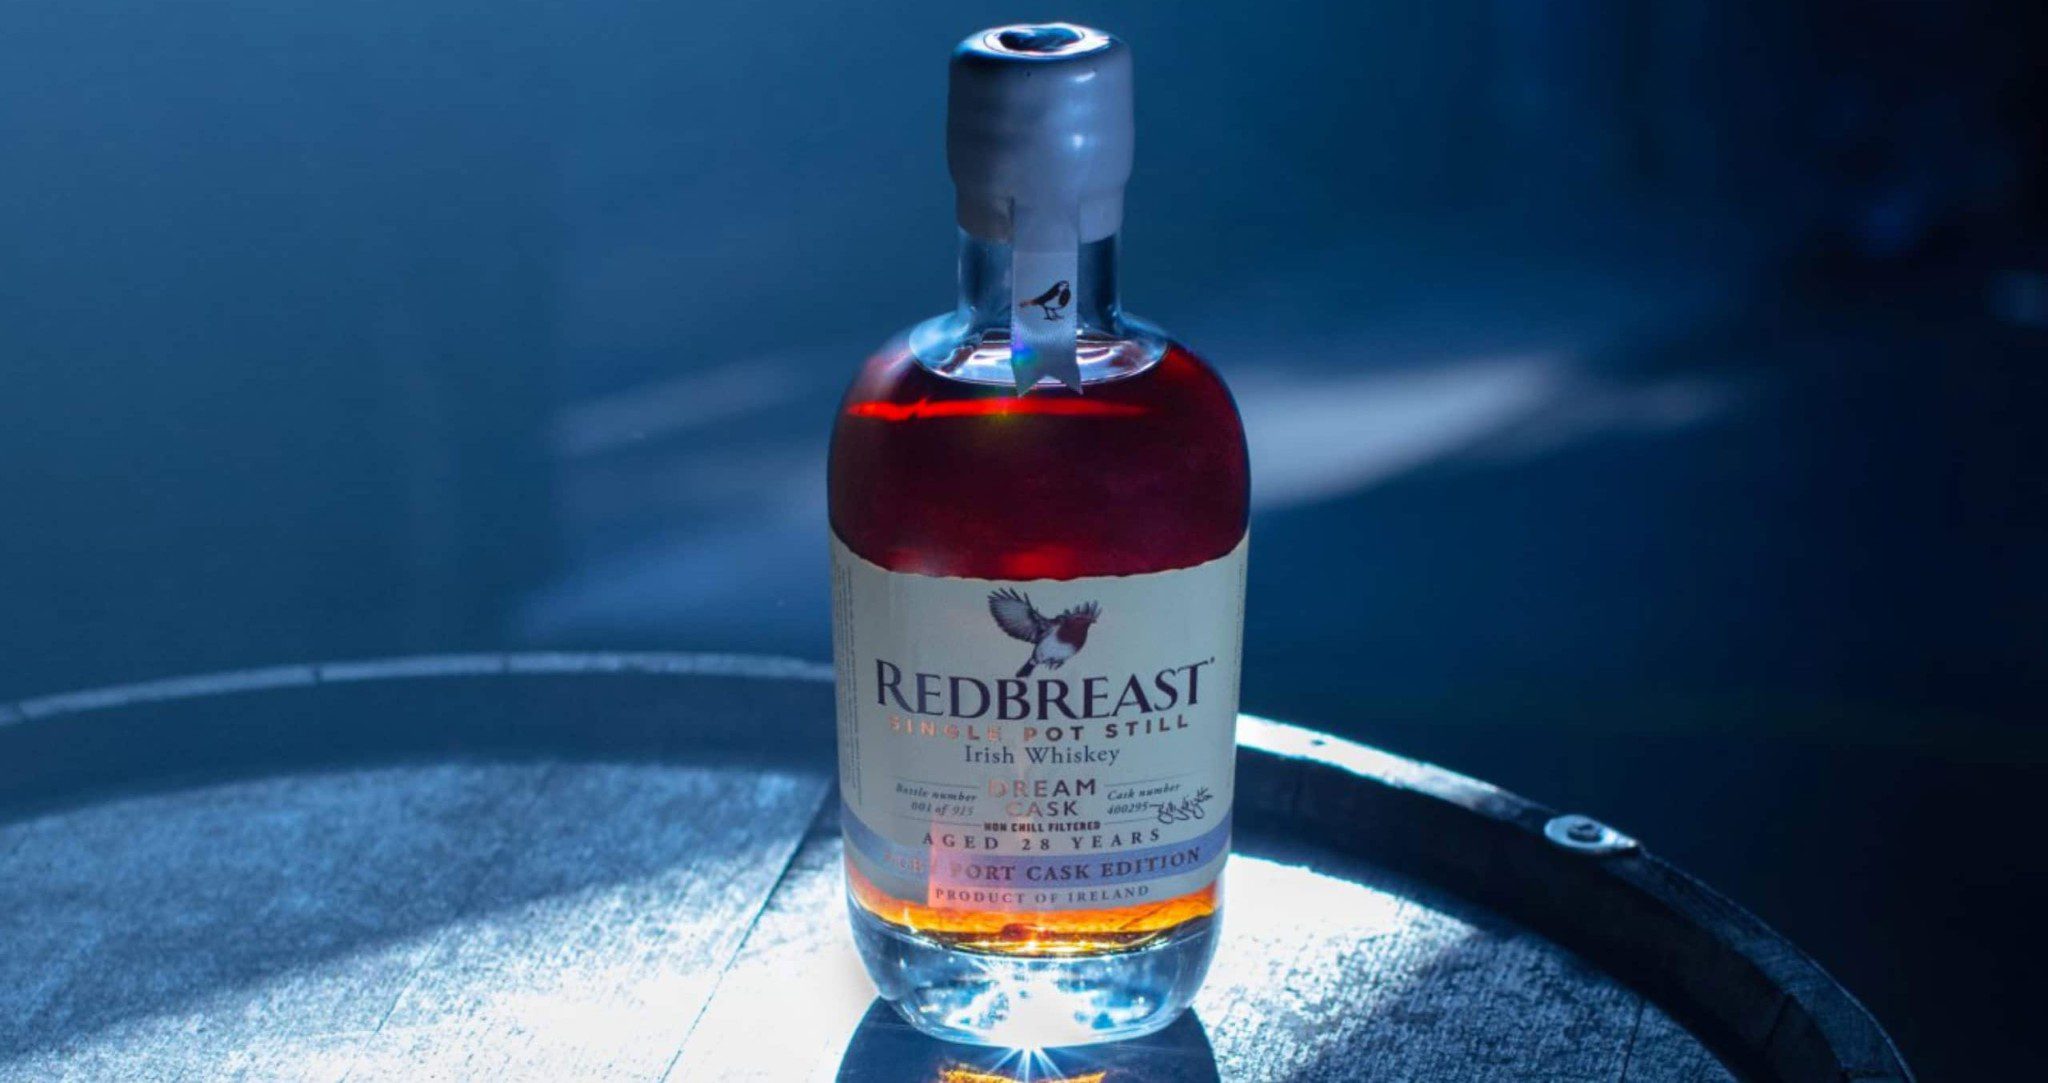 Redbreast Releases Dream Cask Ruby Port Edition - Uptown Spirits